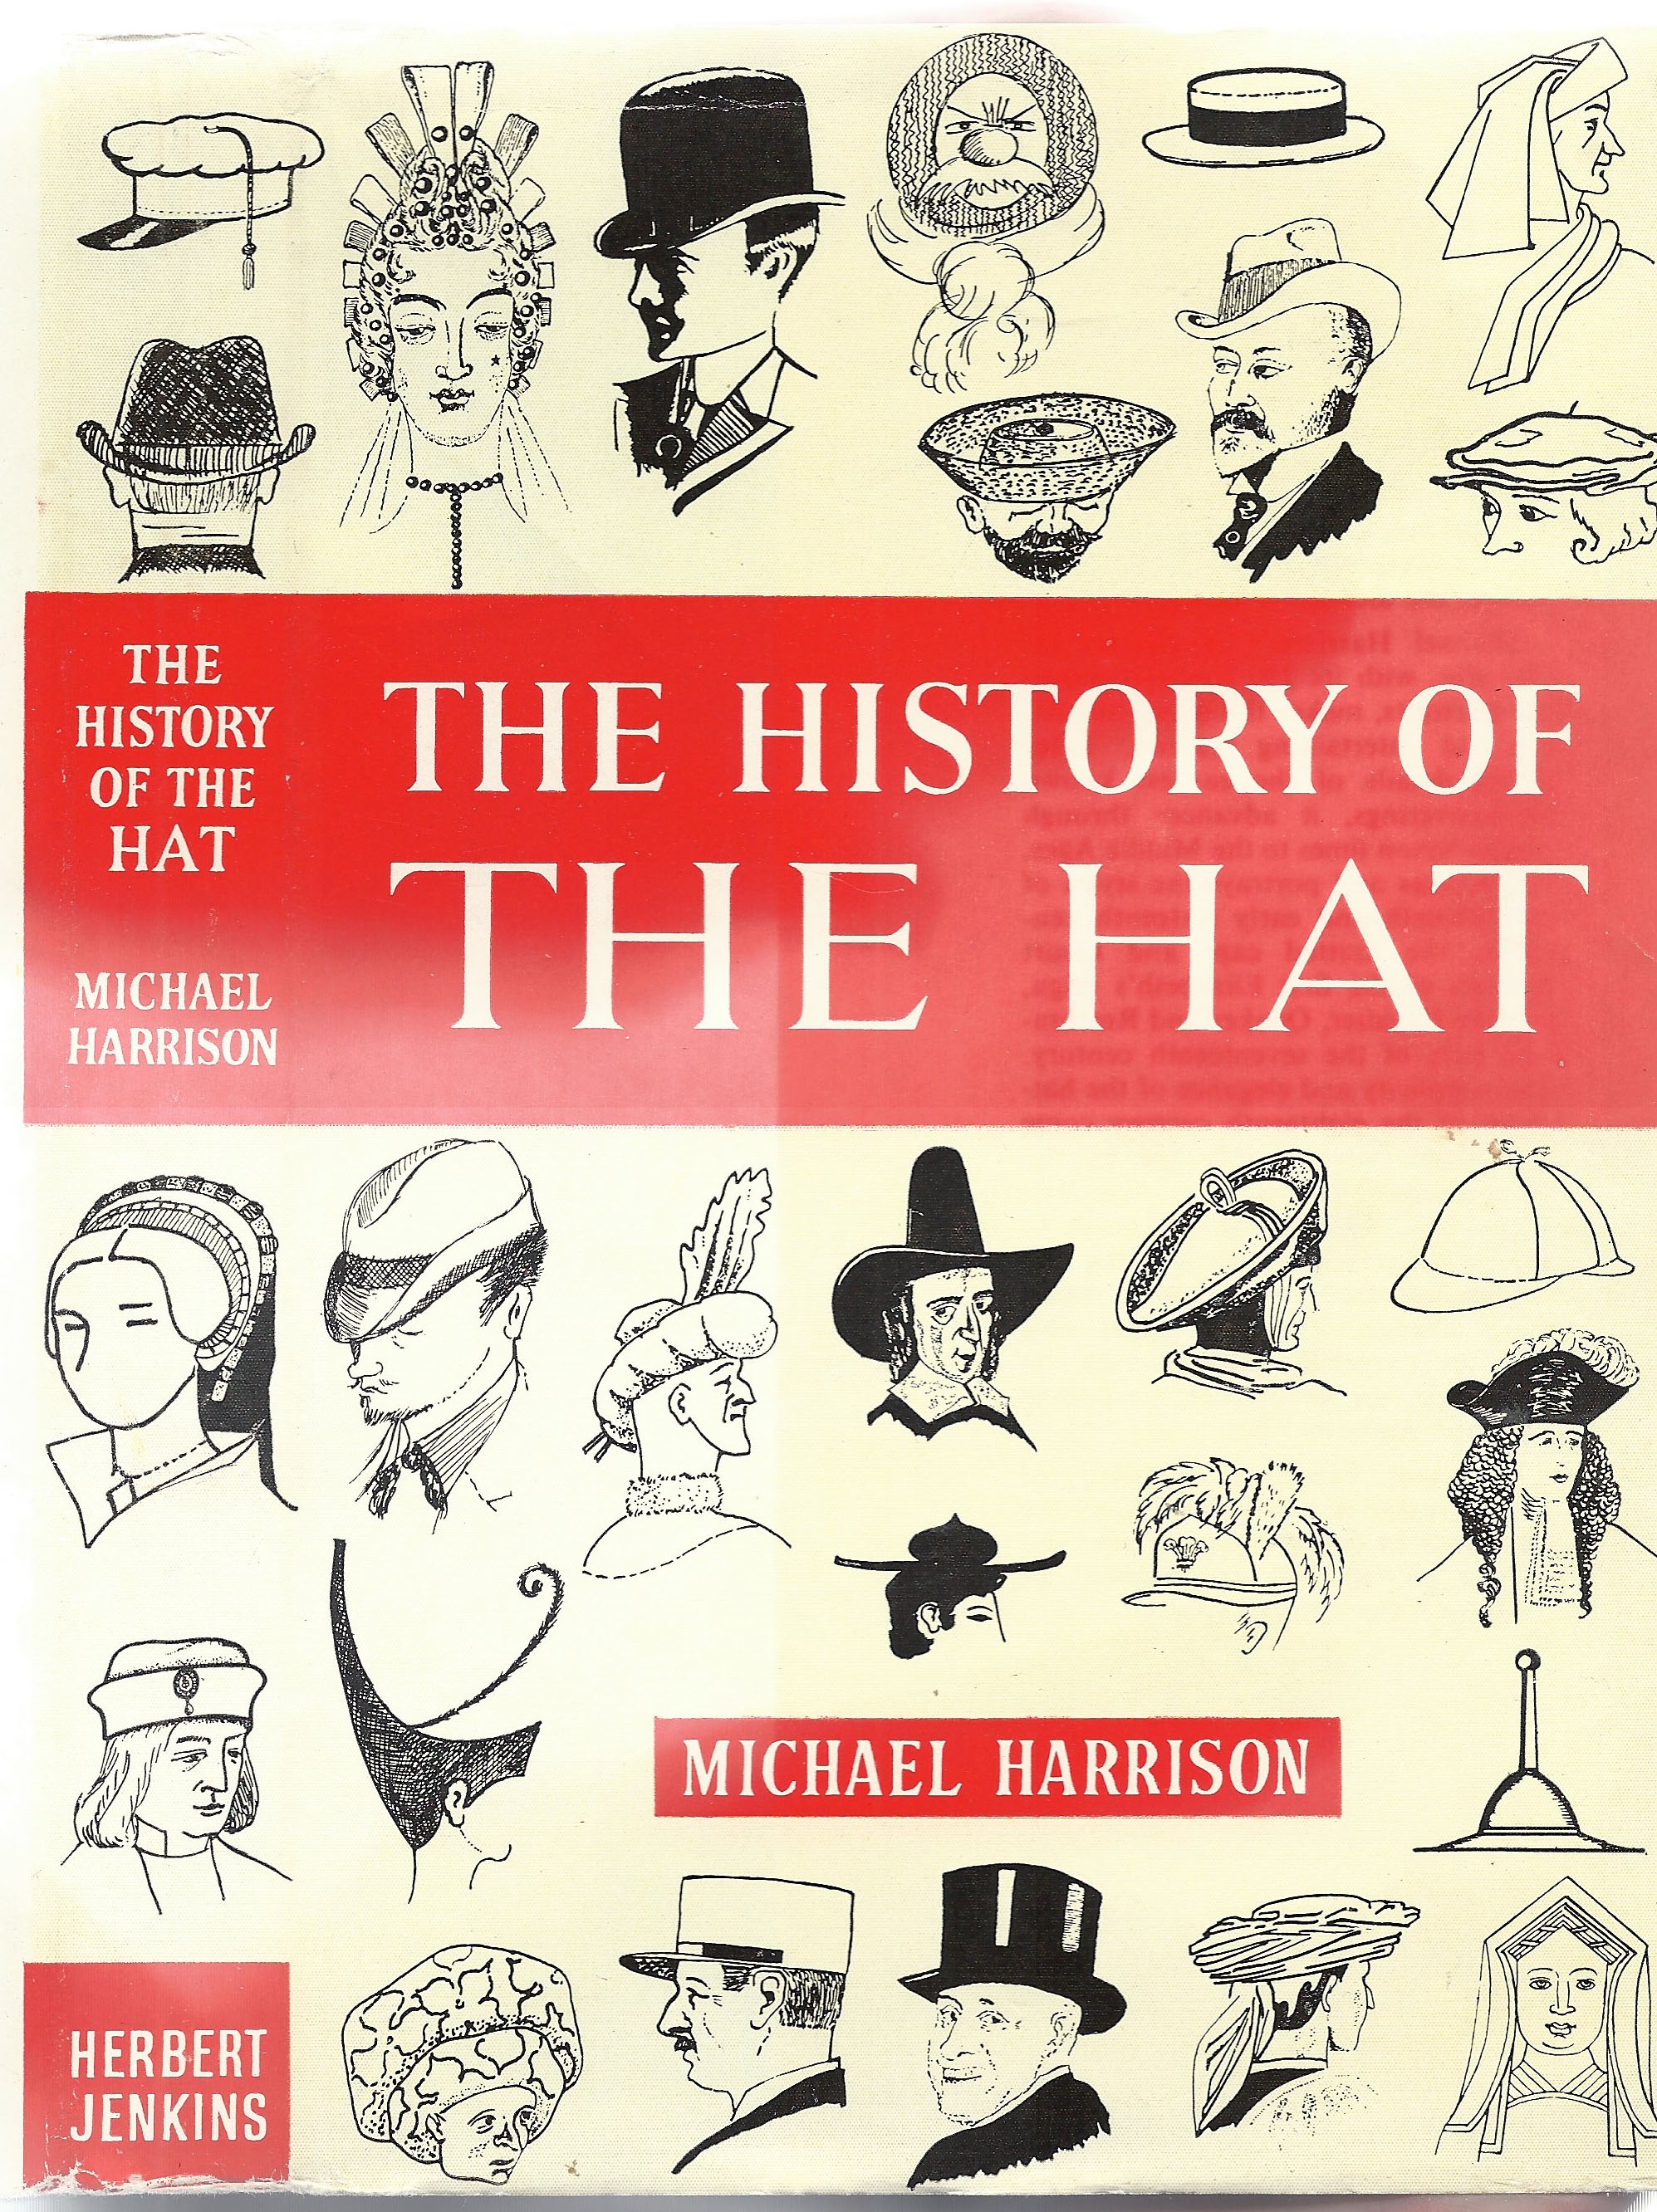 Cover for The History of the Hat.jpg